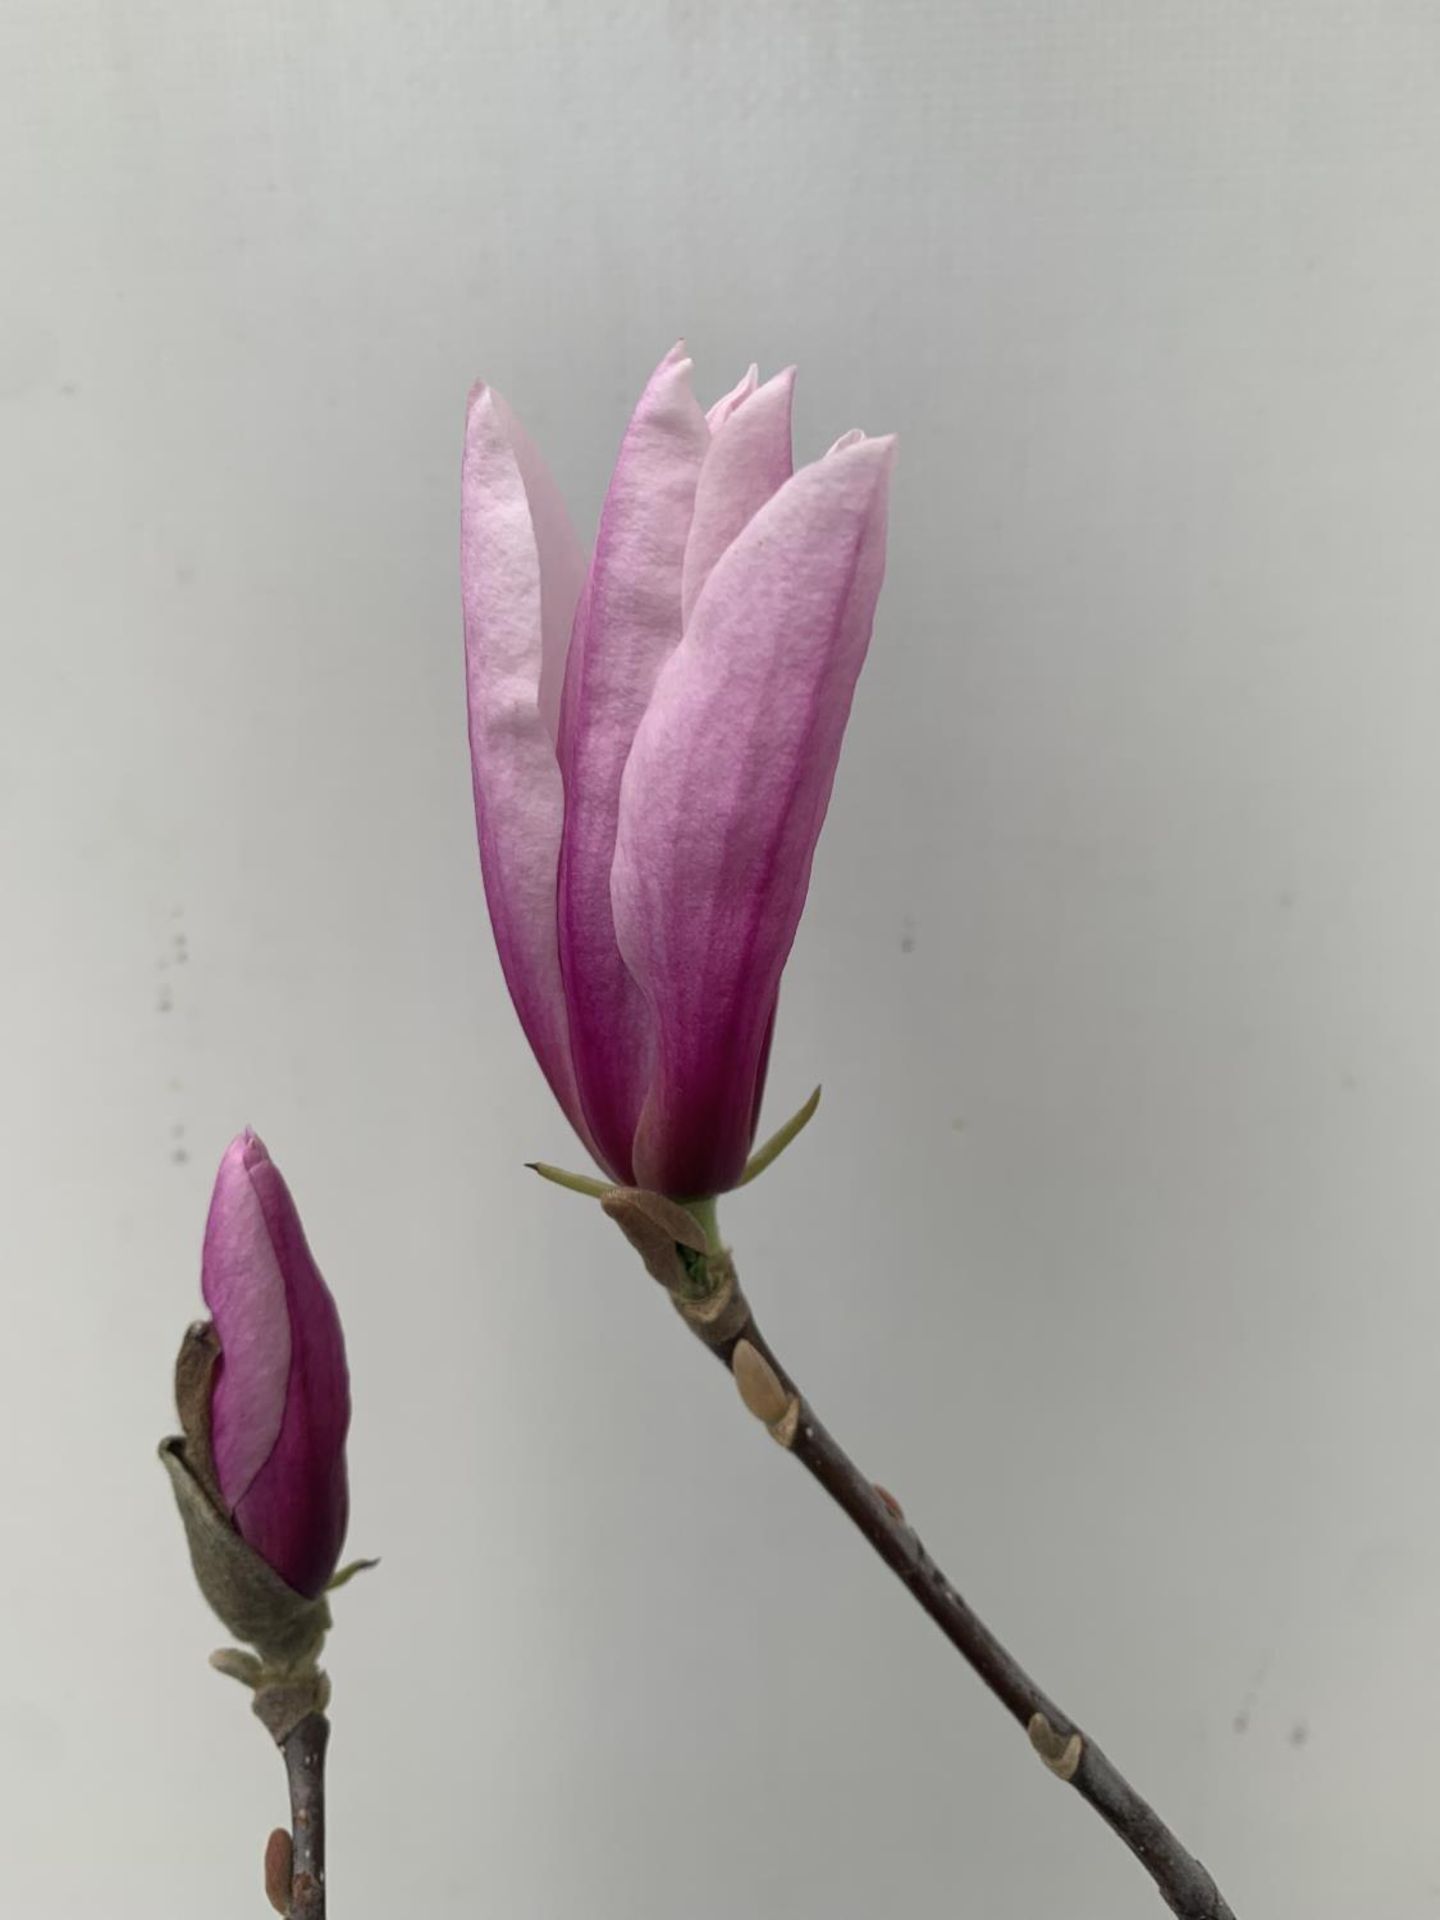 ONE MAGNOLIA PINK 'BETTY' APPROX 120CM IN HEIGHT IN 7 LTR POT PLUS VAT - Image 8 of 12